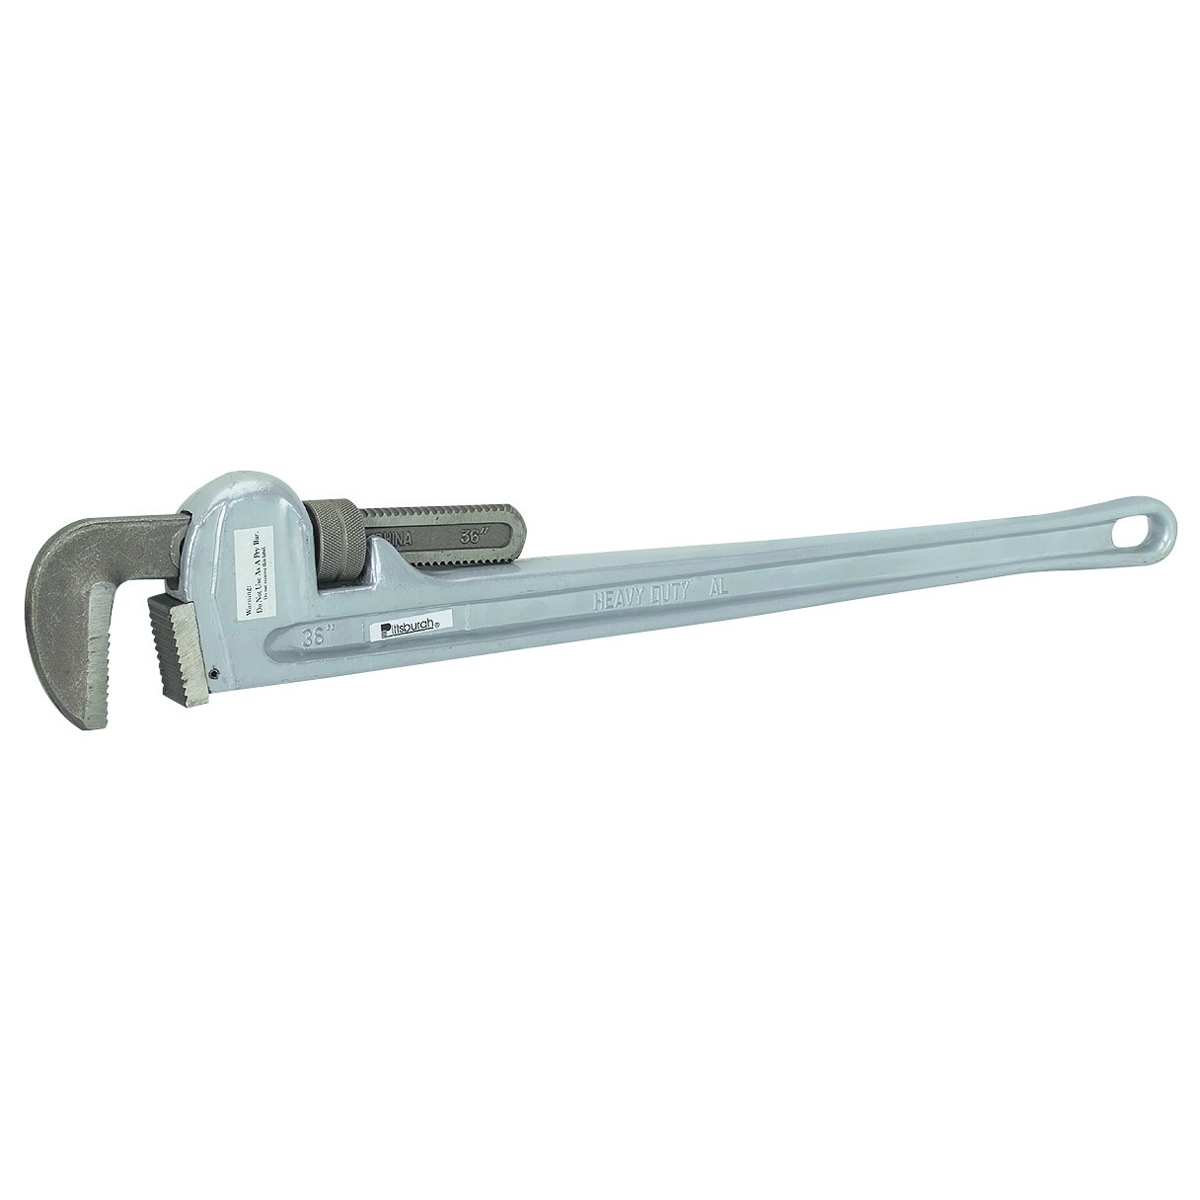 PITTSBURGH 36 in. Aluminum Pipe Wrench - Item 63650 / 39607 / 60527